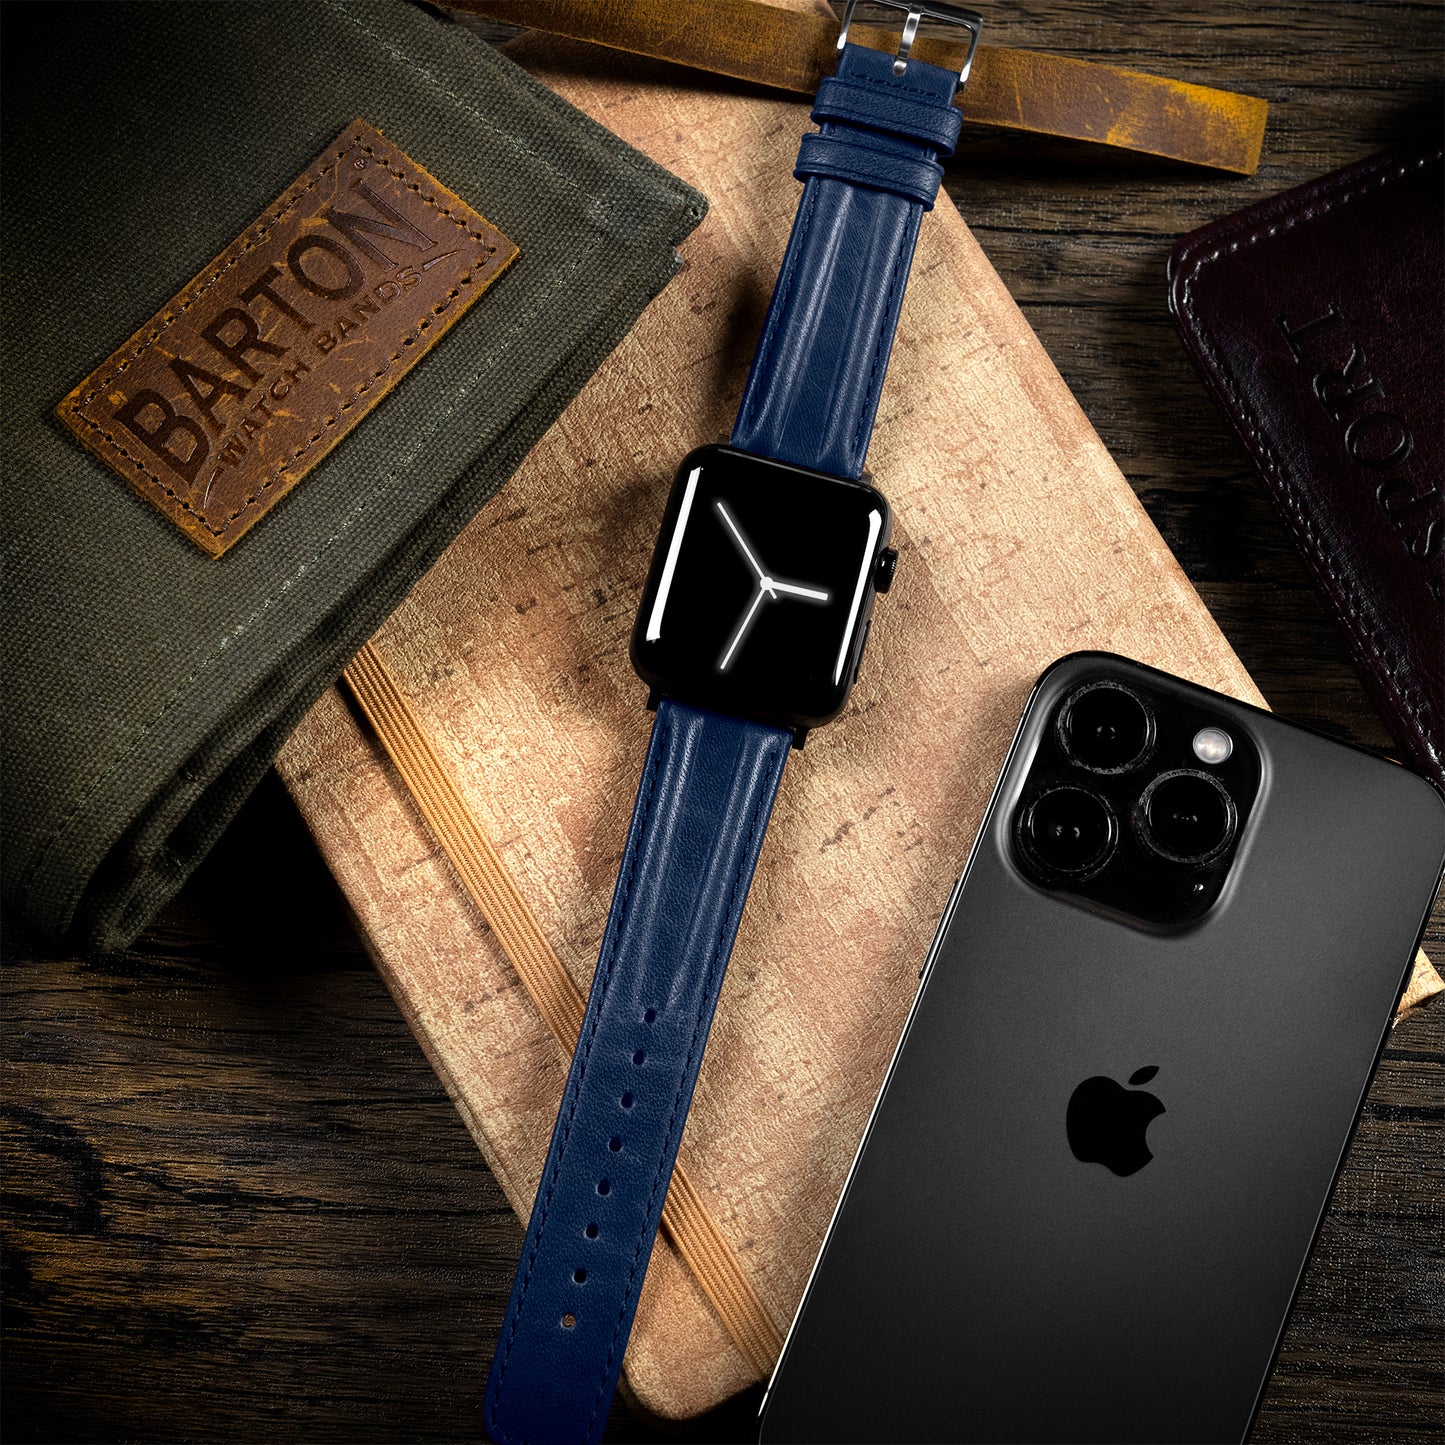 Apple Watch Navy Blue Classic Horween Leather Watch Band